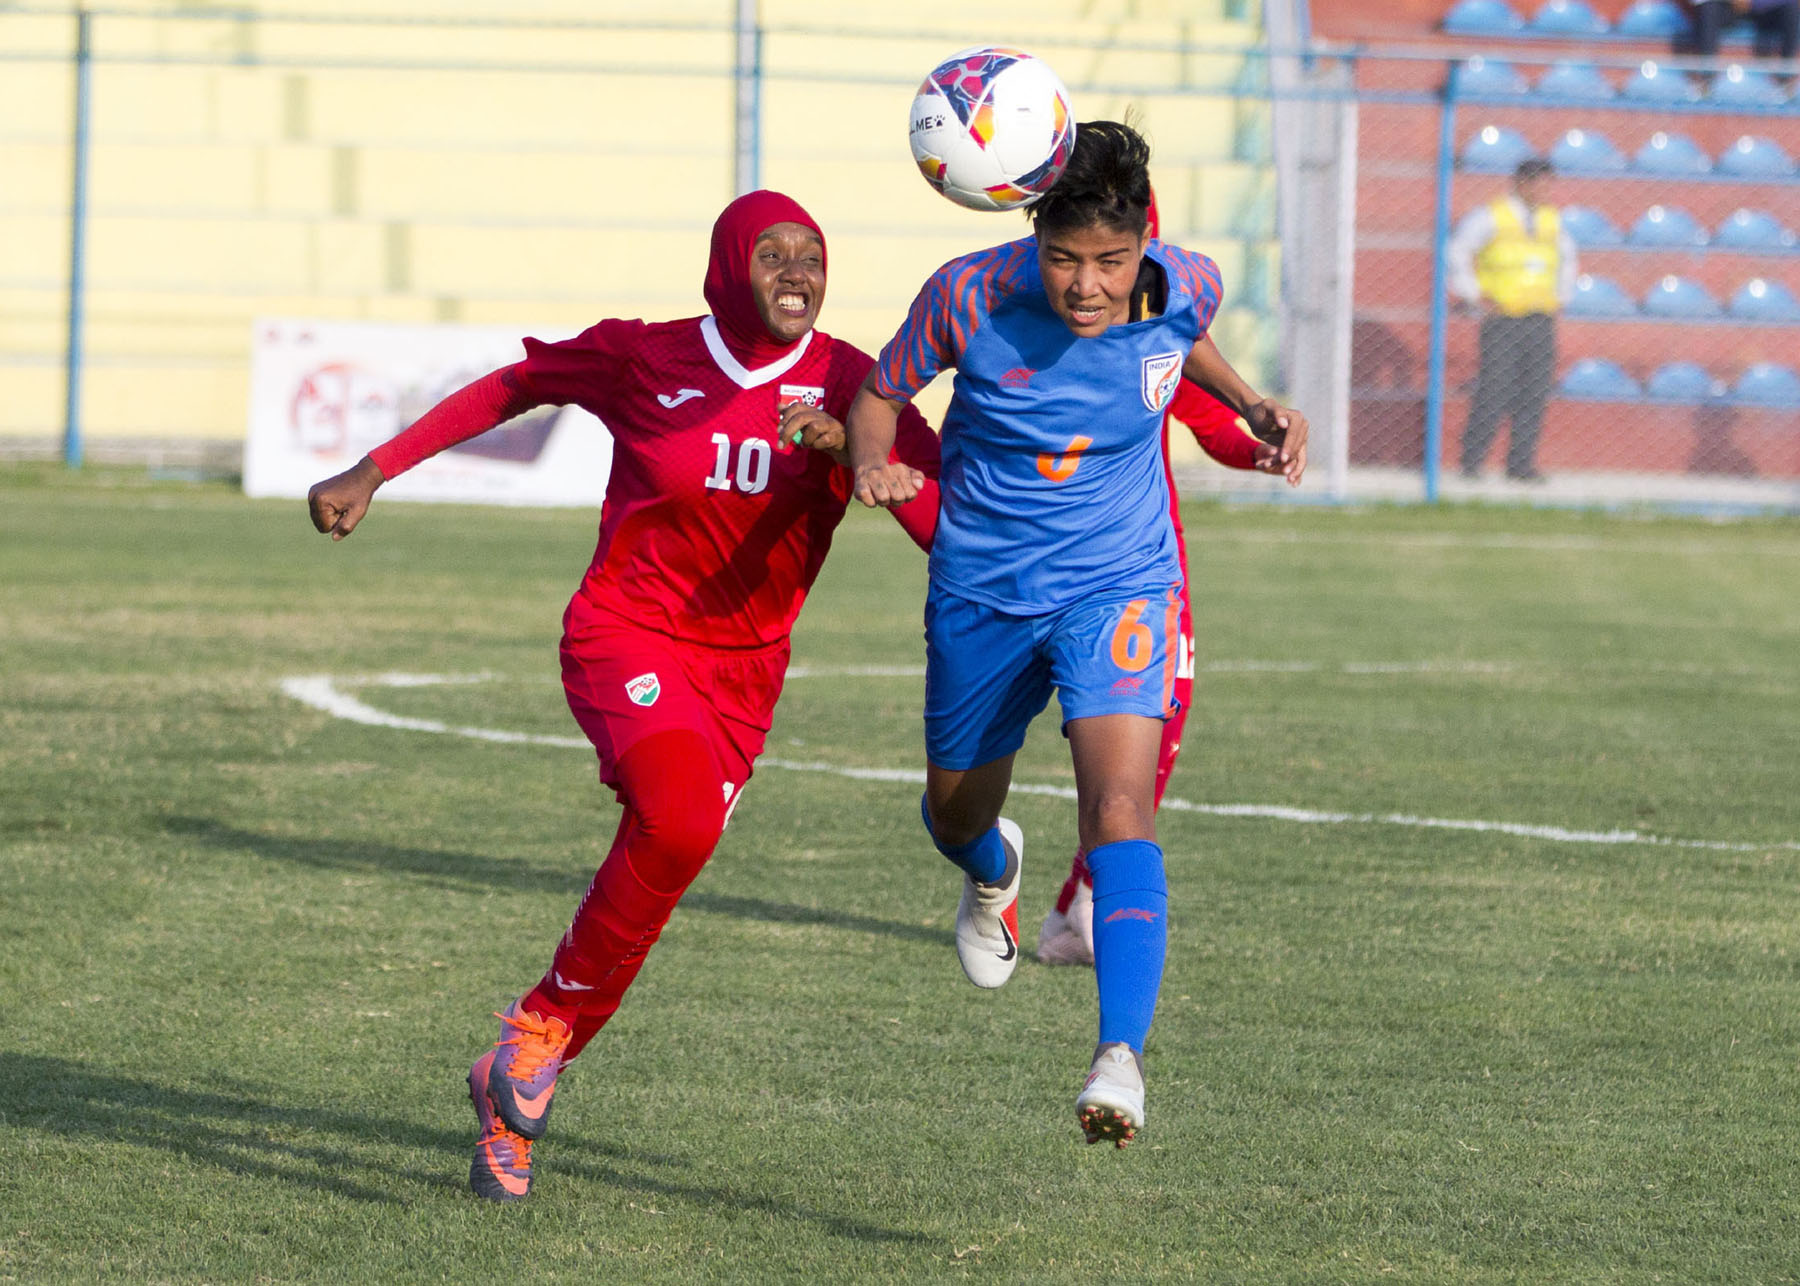 13th SAGF: India enters finals in women’s football